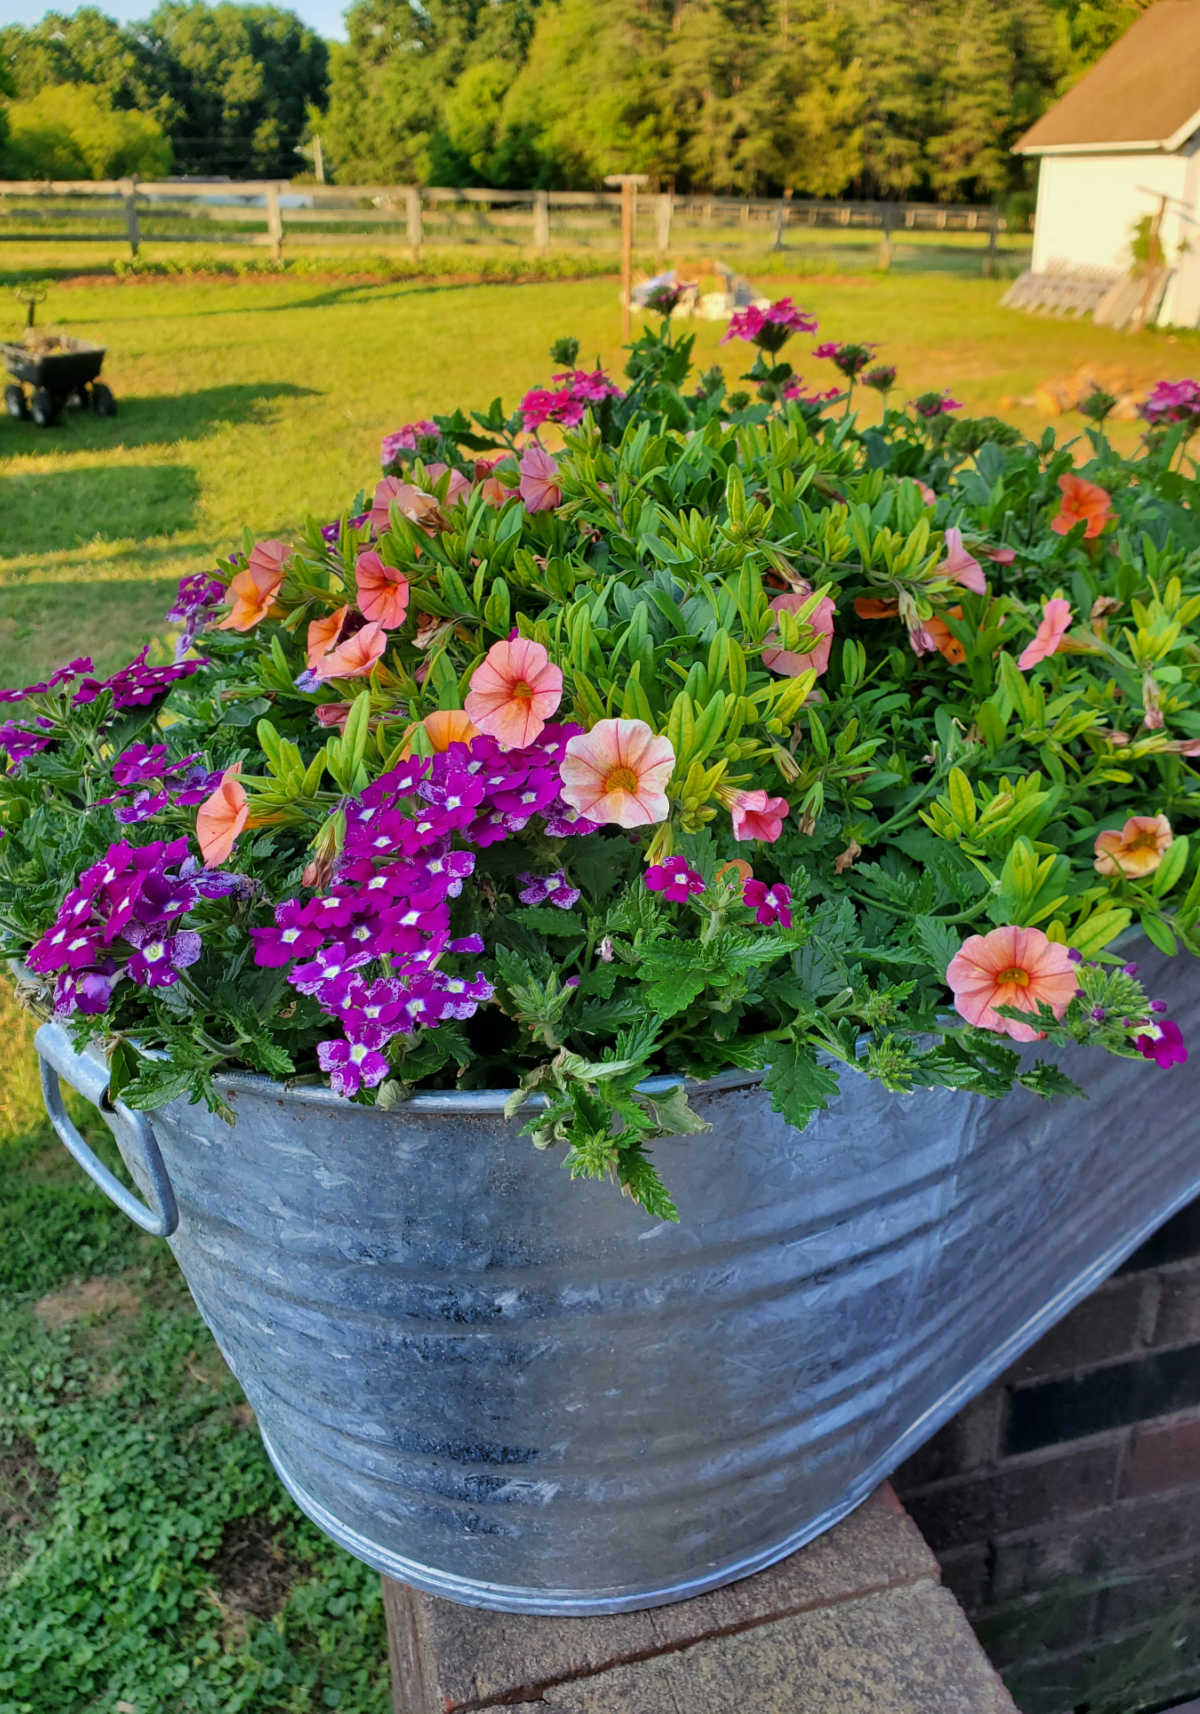 Galvanized planter with superbells, petunias and purple verbena for attracting hummingbirds in backyard.